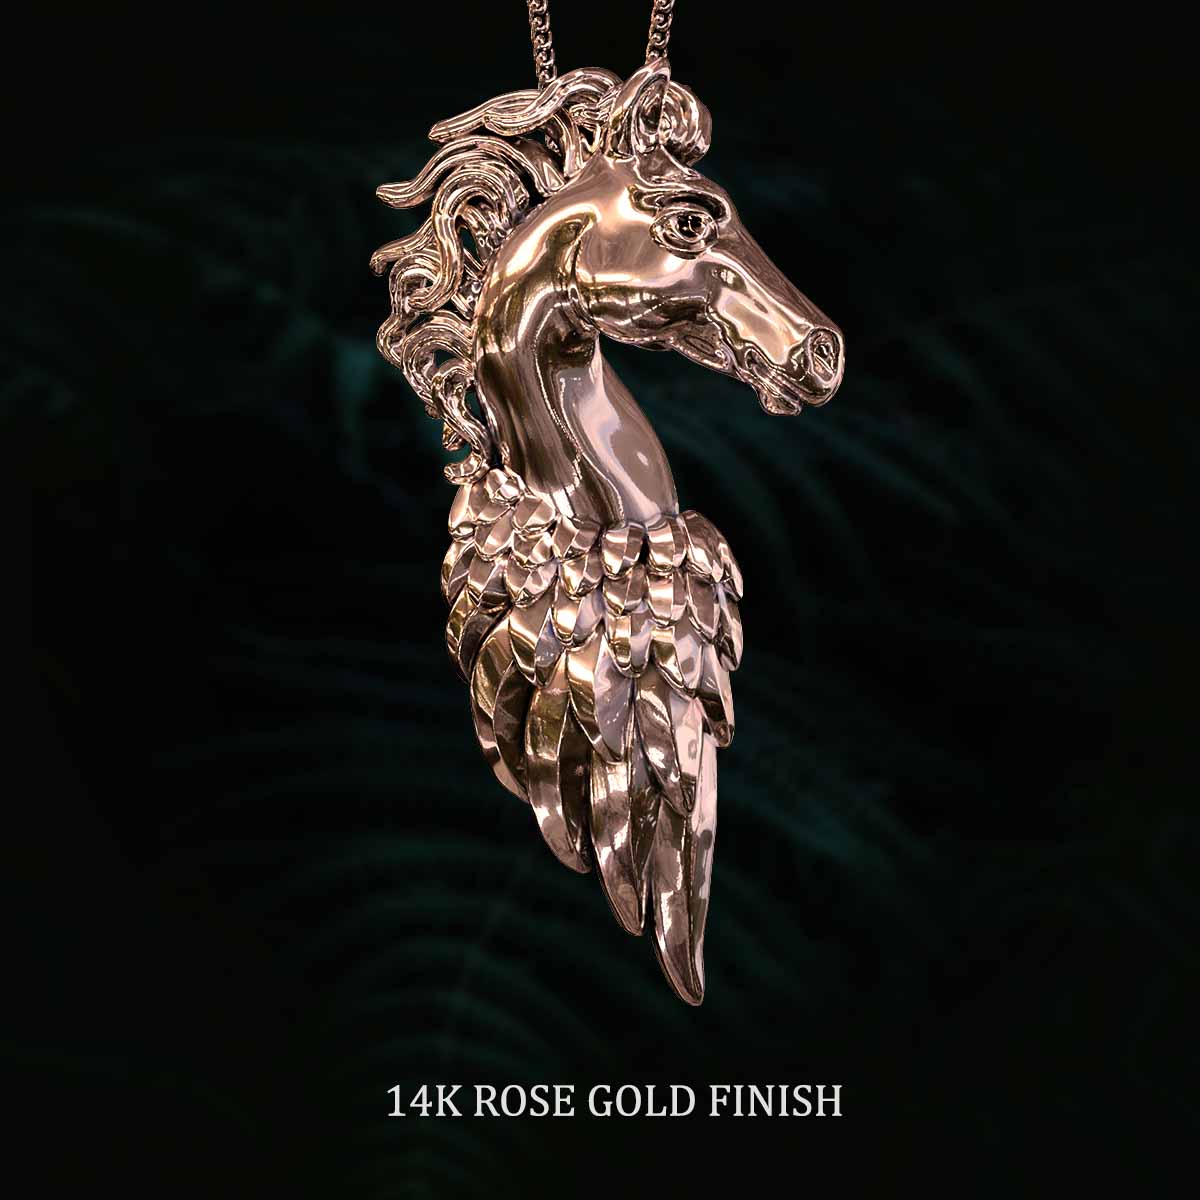     14k-Rose-Gold-Finish-Pegasus-Pendant-Jewelry-For-Necklace